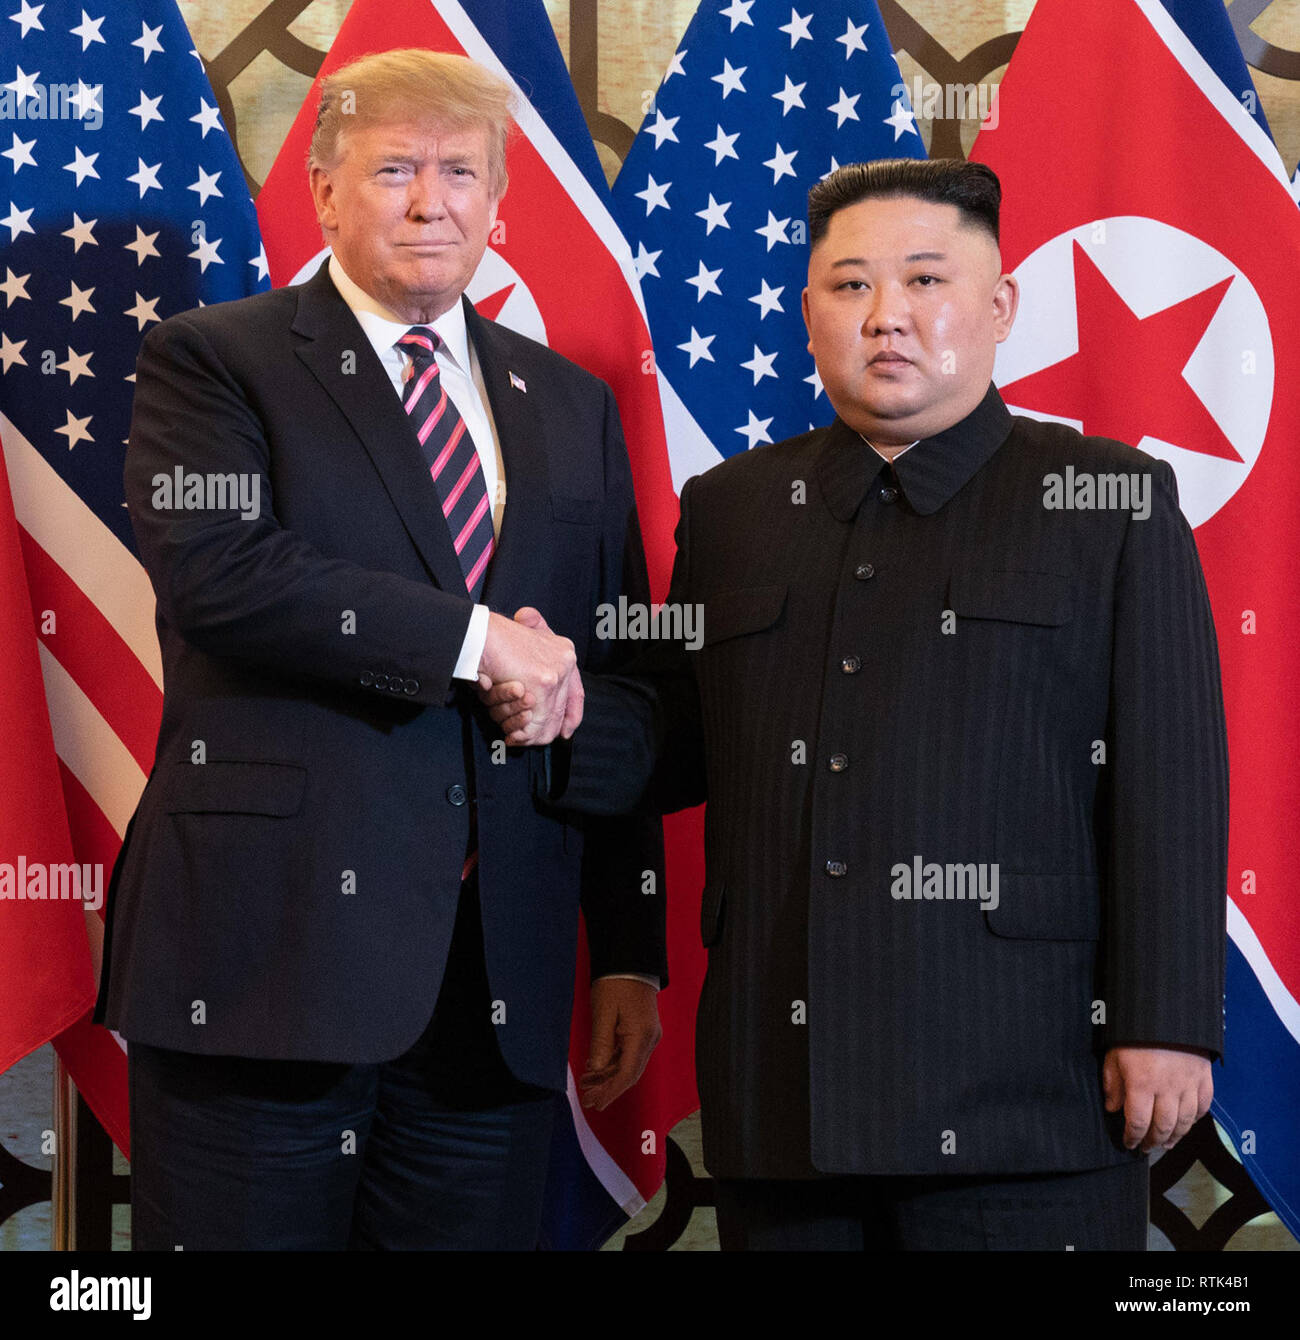 President Donald J. Trump is greeted by Kim Jong Un, Chairman of the State Affairs Commission of the Democratic People’s Republic of Korea, Wednesday, Feb. 27, 2019, at the Sofitel Legend Metropole hotel in Hanoi, for their second summit.   People:  President Donald Trump, Kim Jong Un Stock Photo